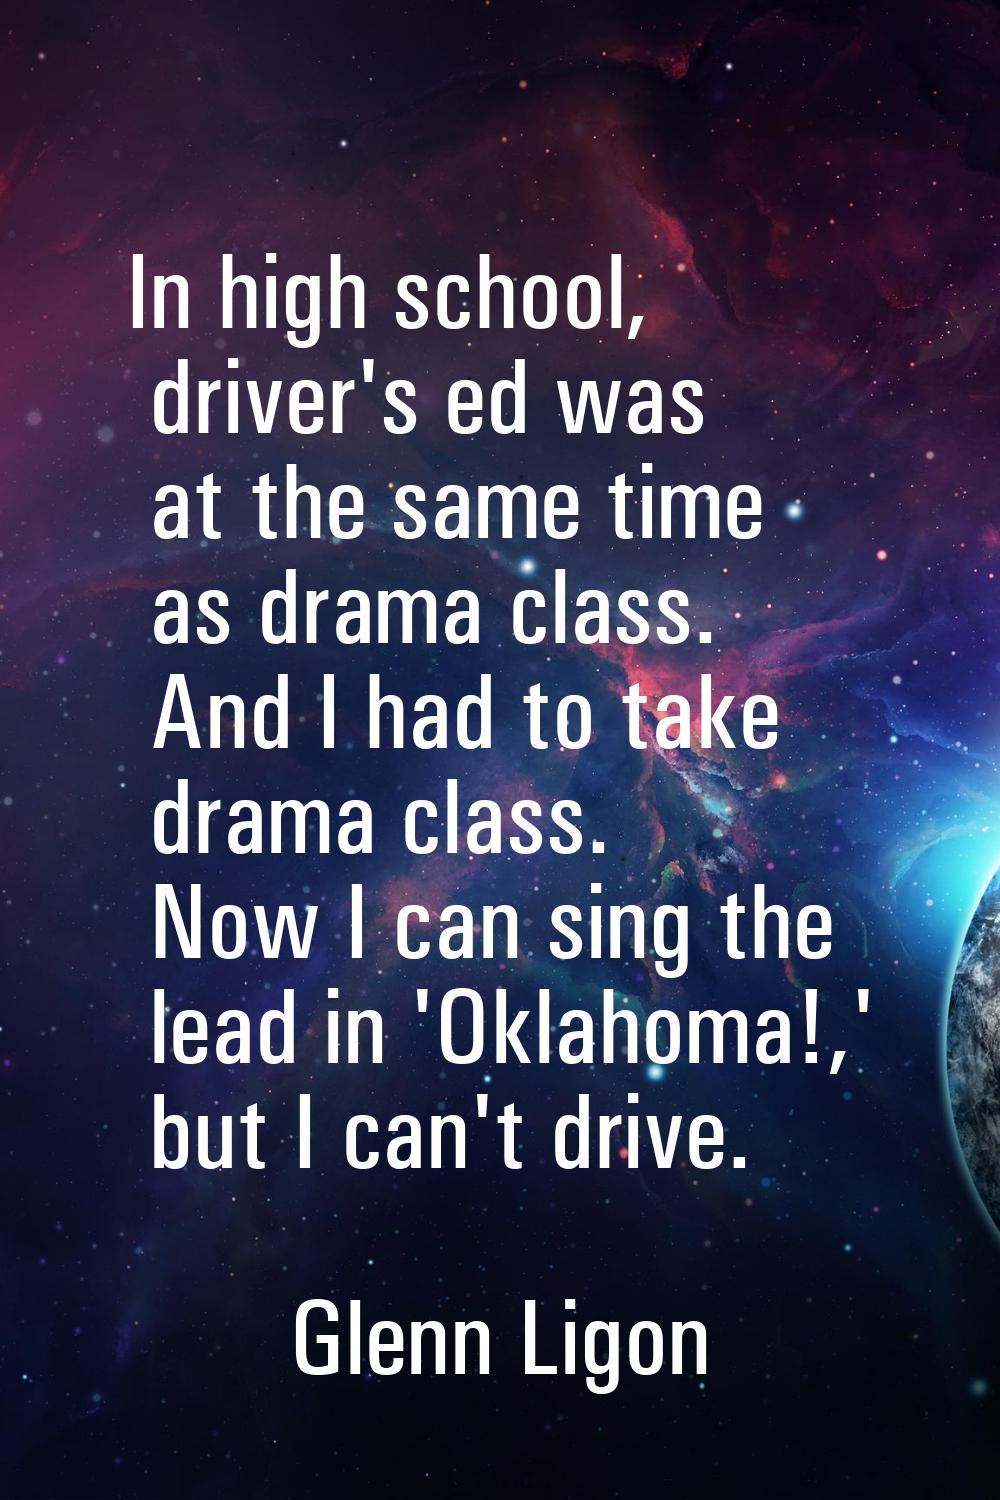 In high school, driver's ed was at the same time as drama class. And I had to take drama class. Now